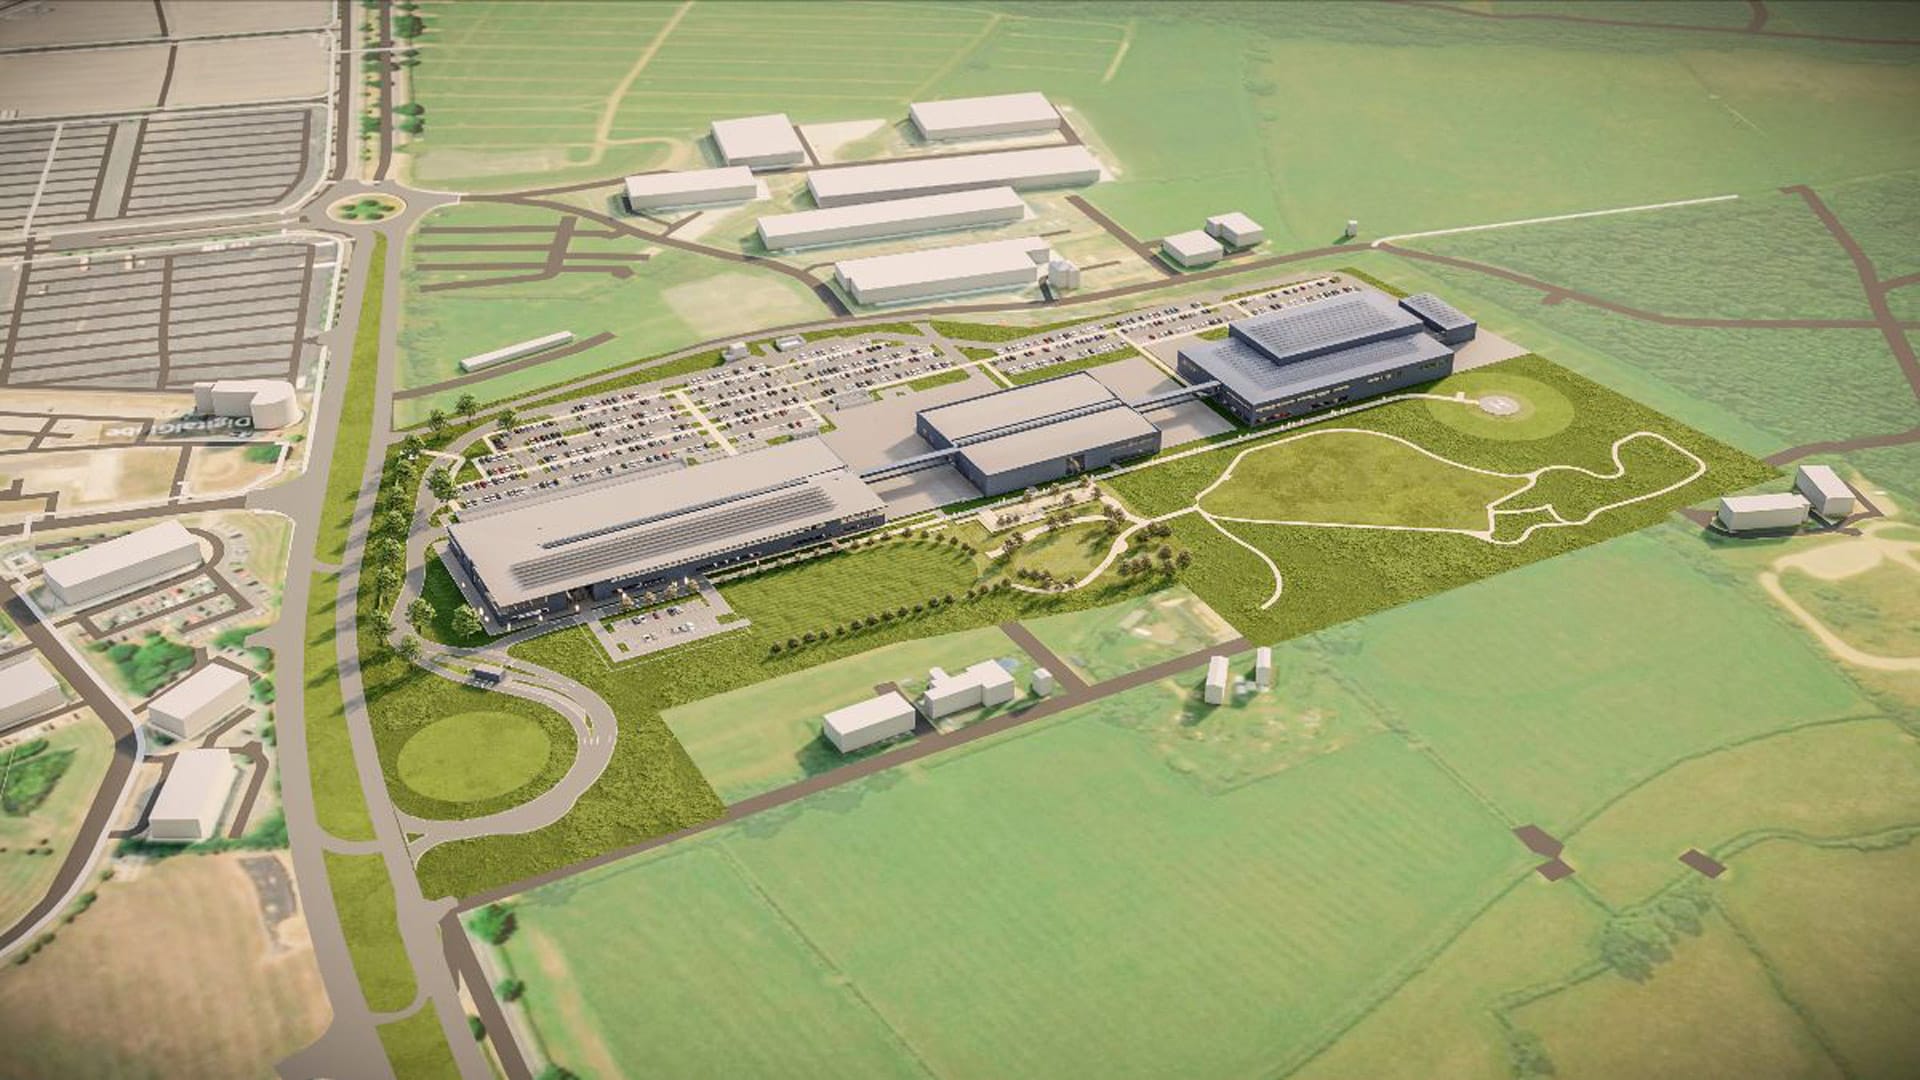 Aston Martin start work on new F1 factory and wind tunnel campus at Silverstone base | Formula 1®